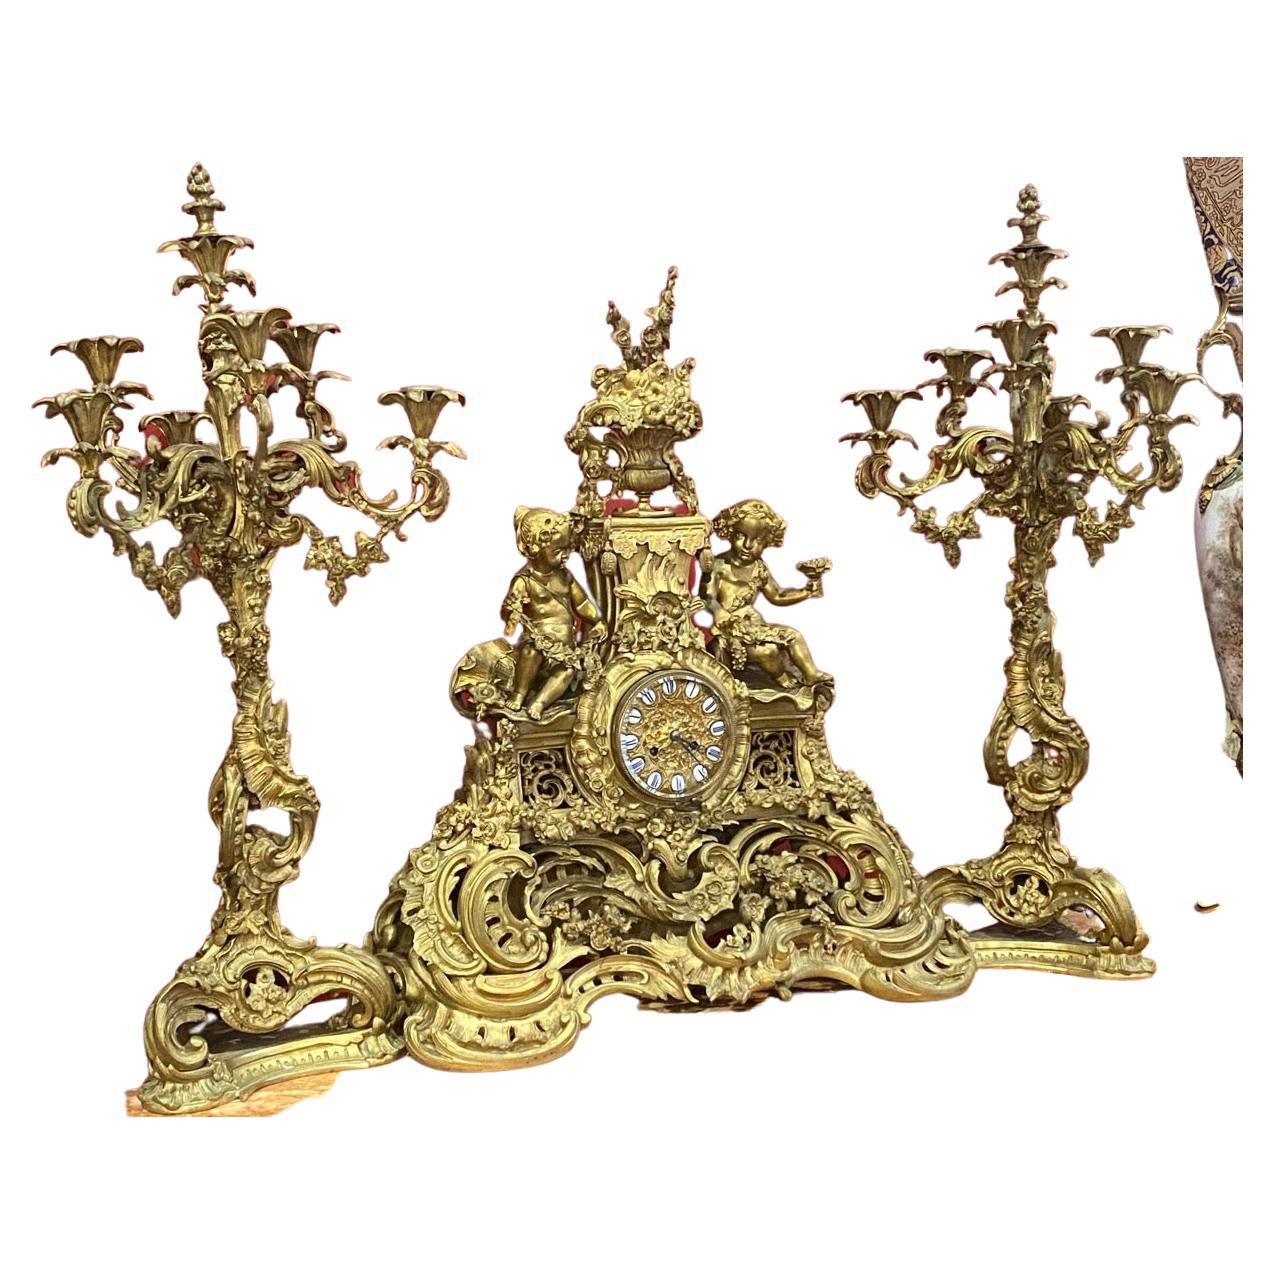 Majestic 19th Century French Gilt Bronze Candelabras and Clock Garniture For Sale